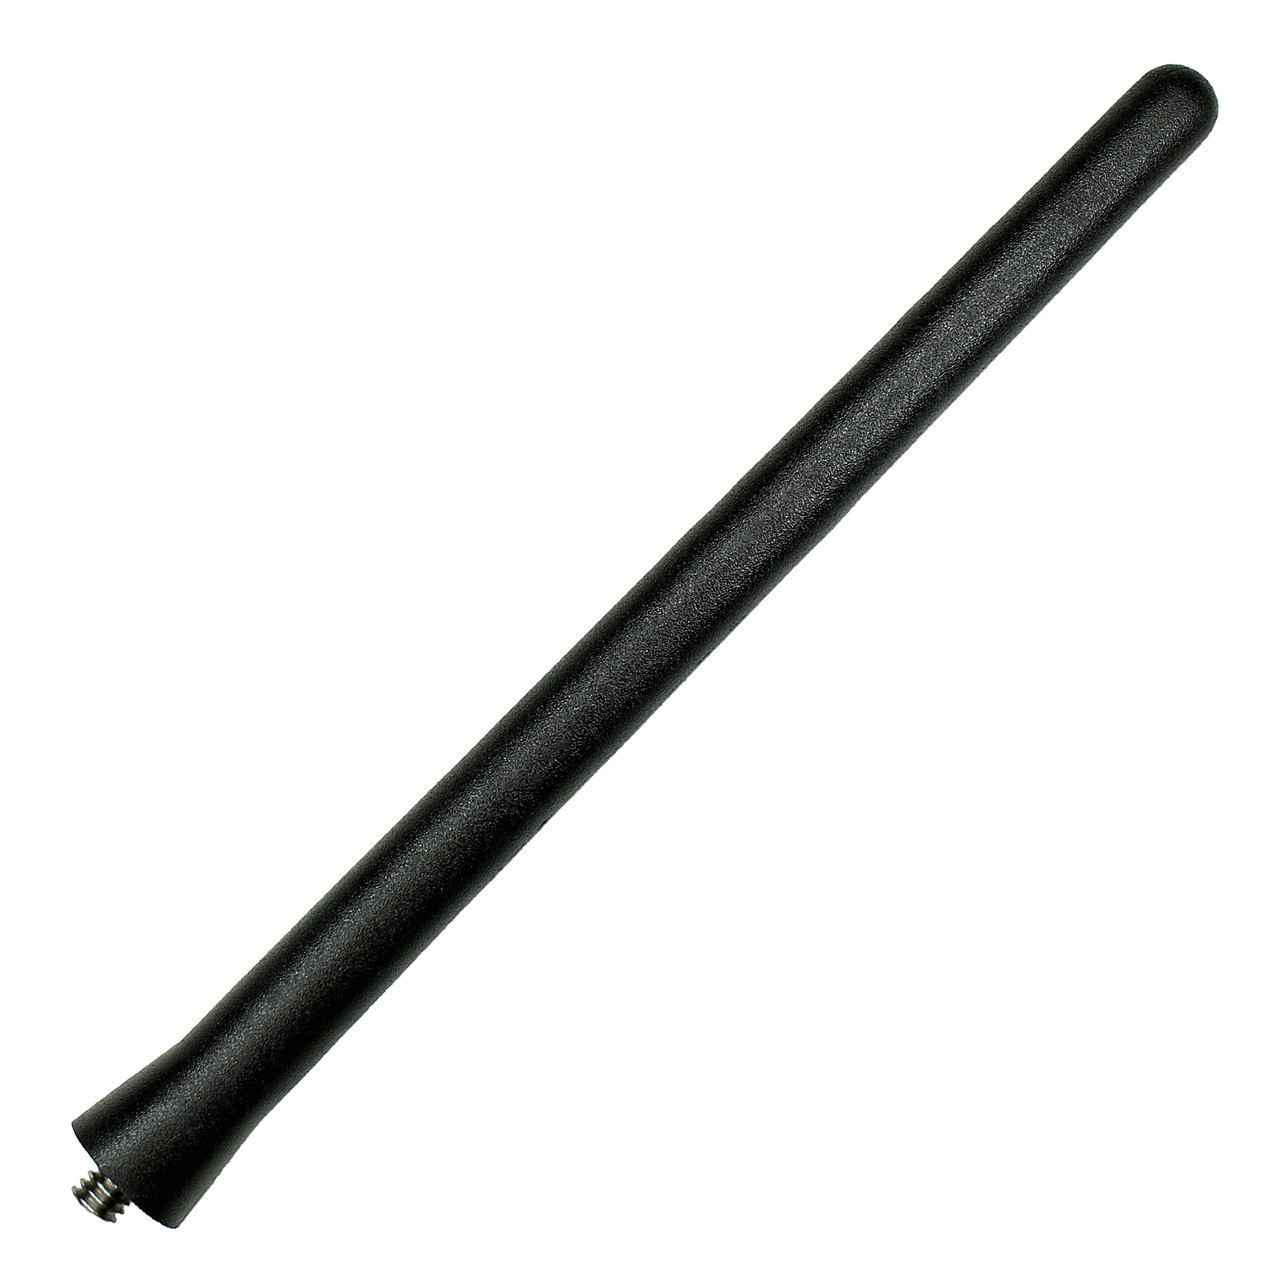 Saturn Outlook Short Rubber Antenna 6 3/4 Inch (2007-2010) - Car Wash Proof - Powerful Internal Copper Coil/Premium Reception